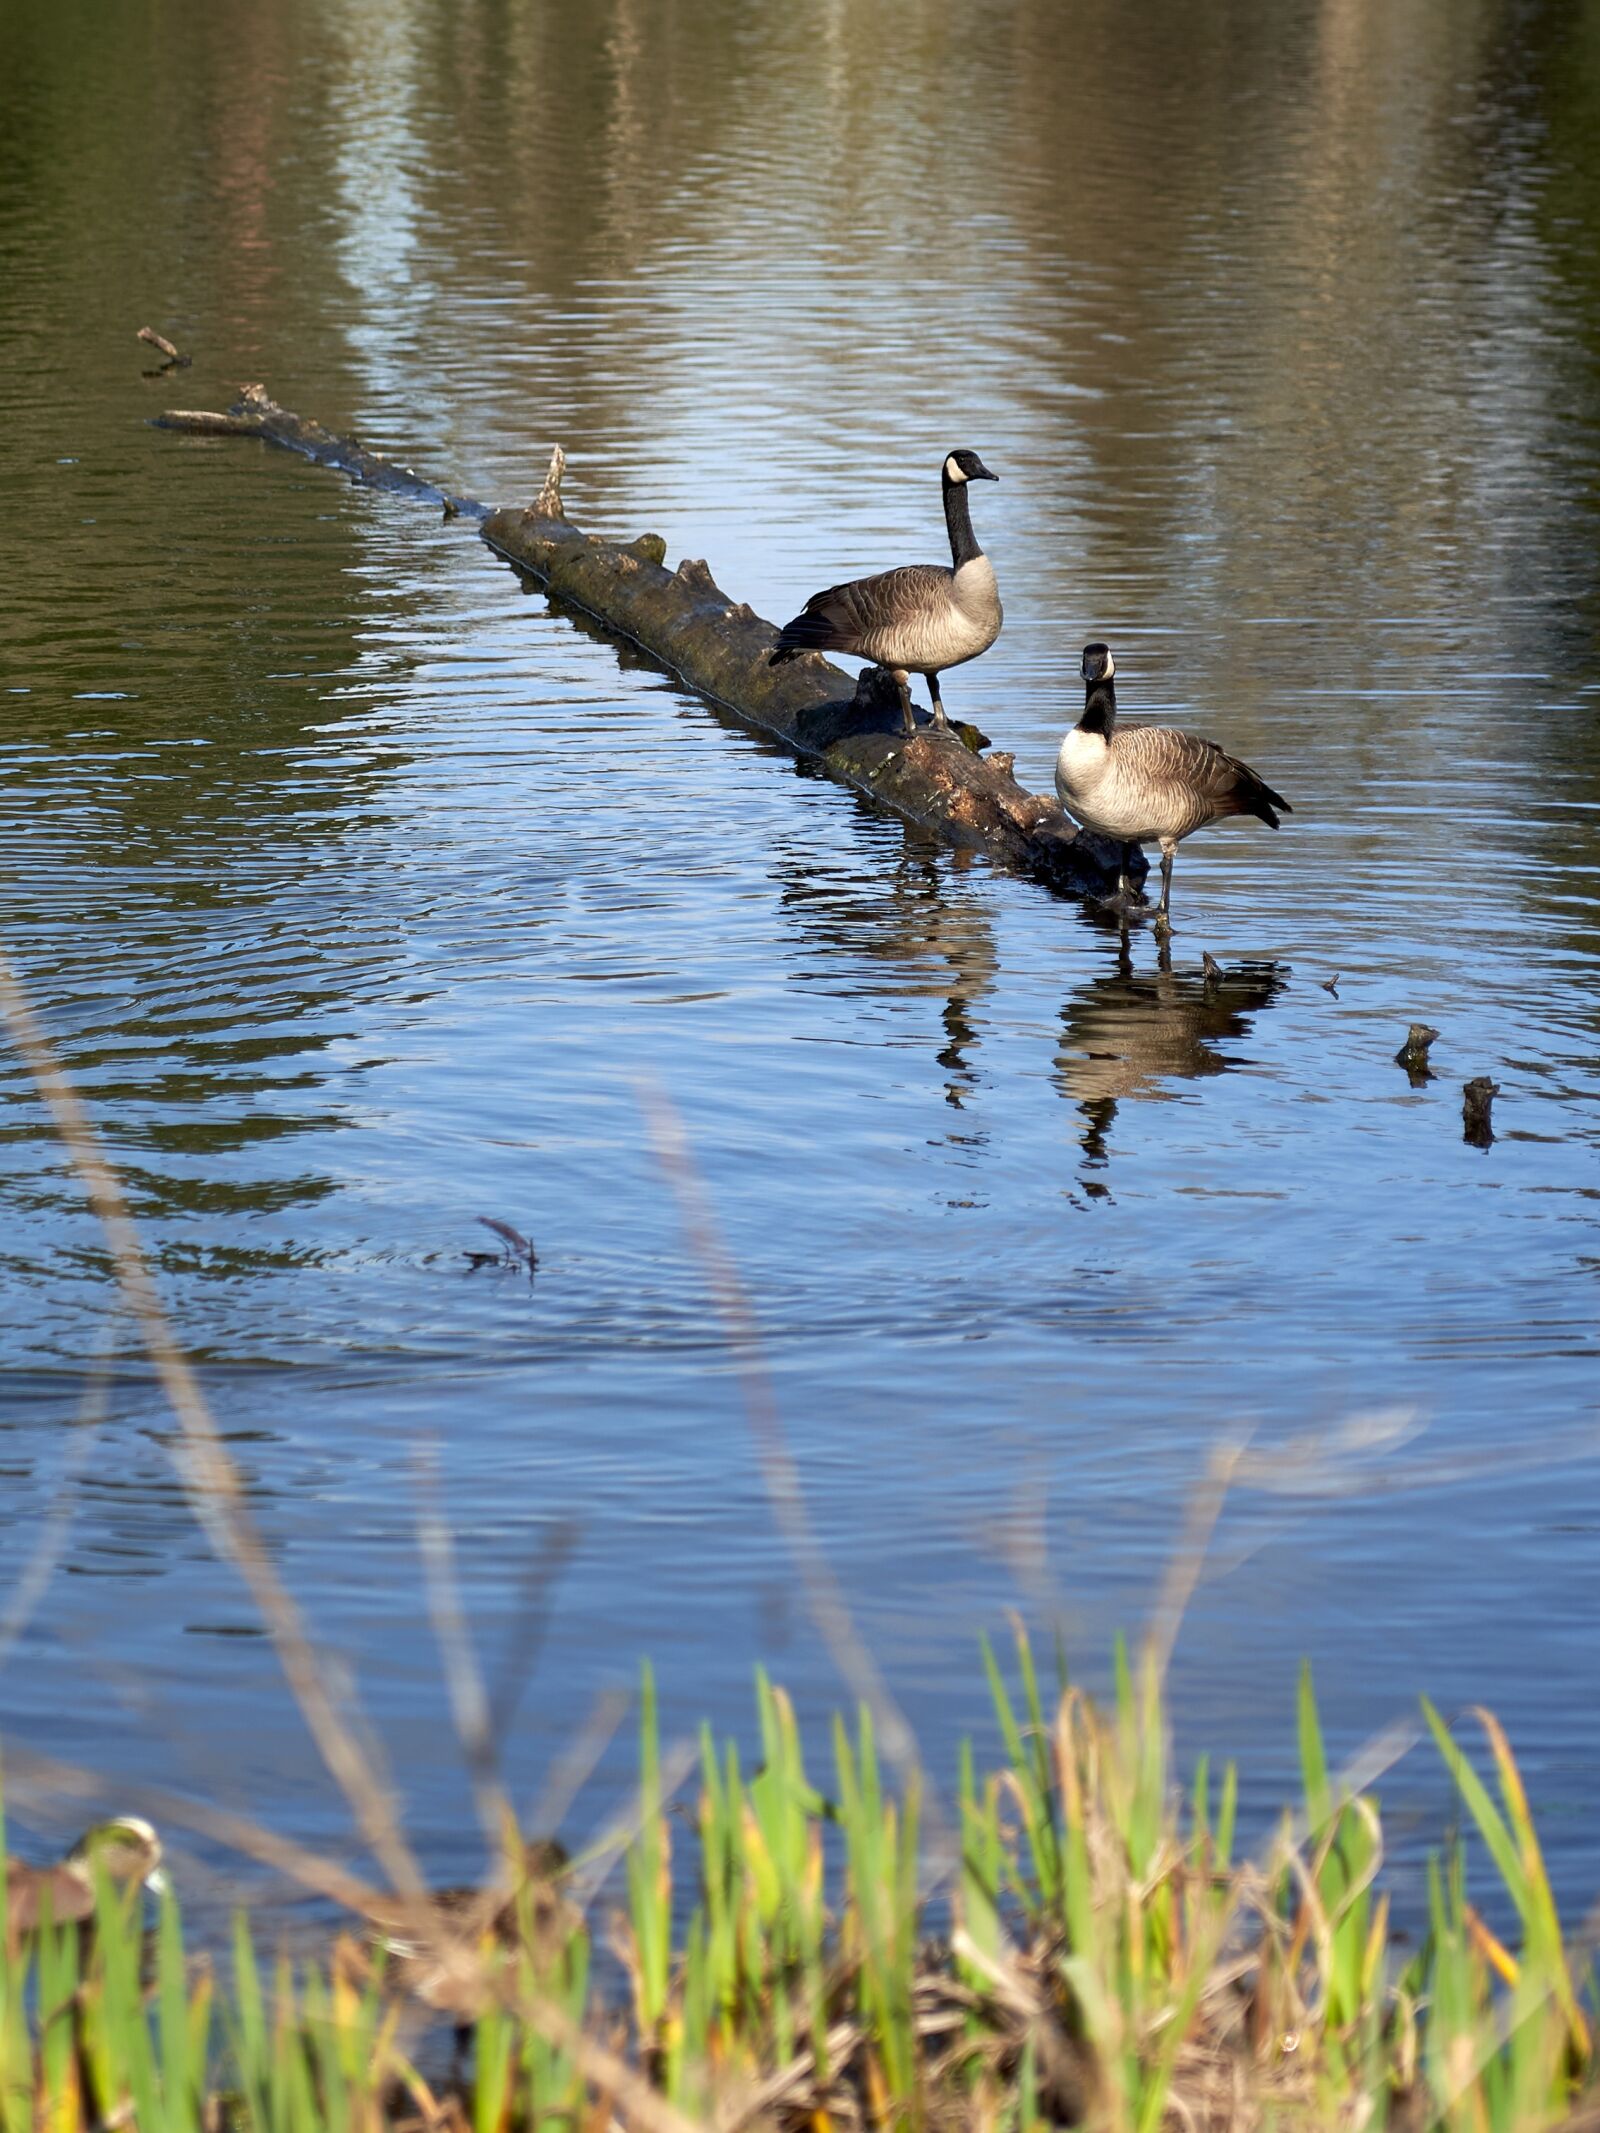 Zeiss Vario-Sonnar T* 24-70 mm F2.8 ZA SSM (SAL2470Z) sample photo. Geese, canadian, nature photography